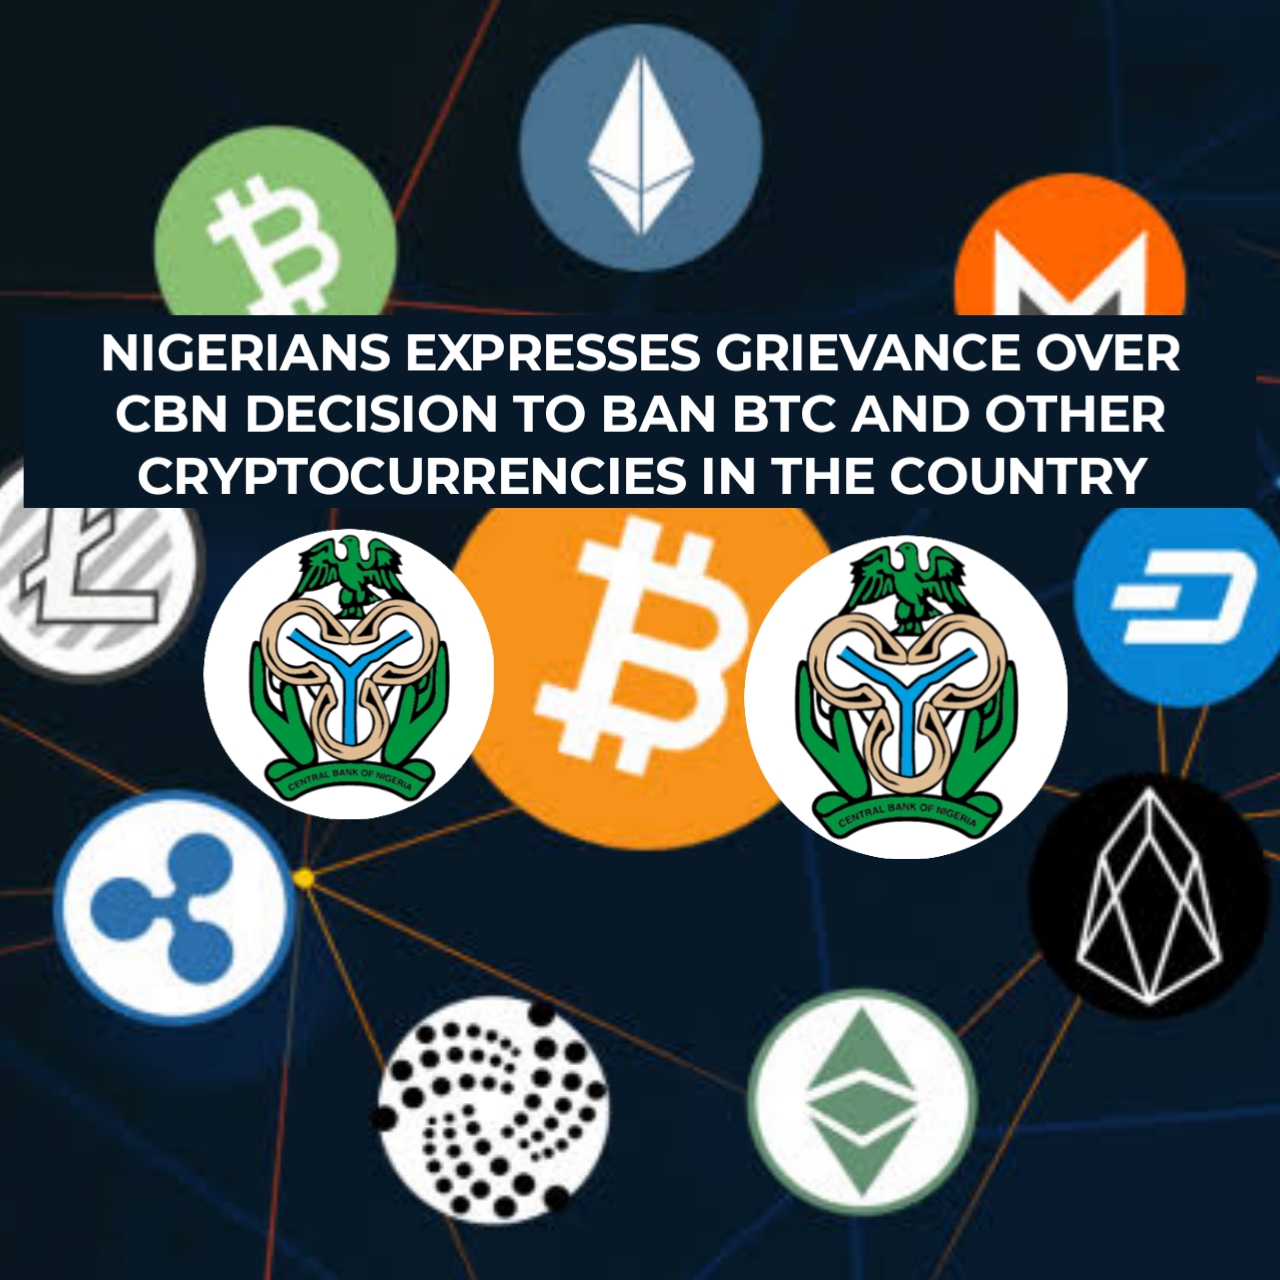 cbn-bans-bitcoin-in-nigeria-nigerians-reacts-over-cbn-decision-ban-on-btc-and-other-cryptocurrencies-in-the-country-droidvilla-technology-solution-android-apk-phone-reviews-technology-updates-tipstricks